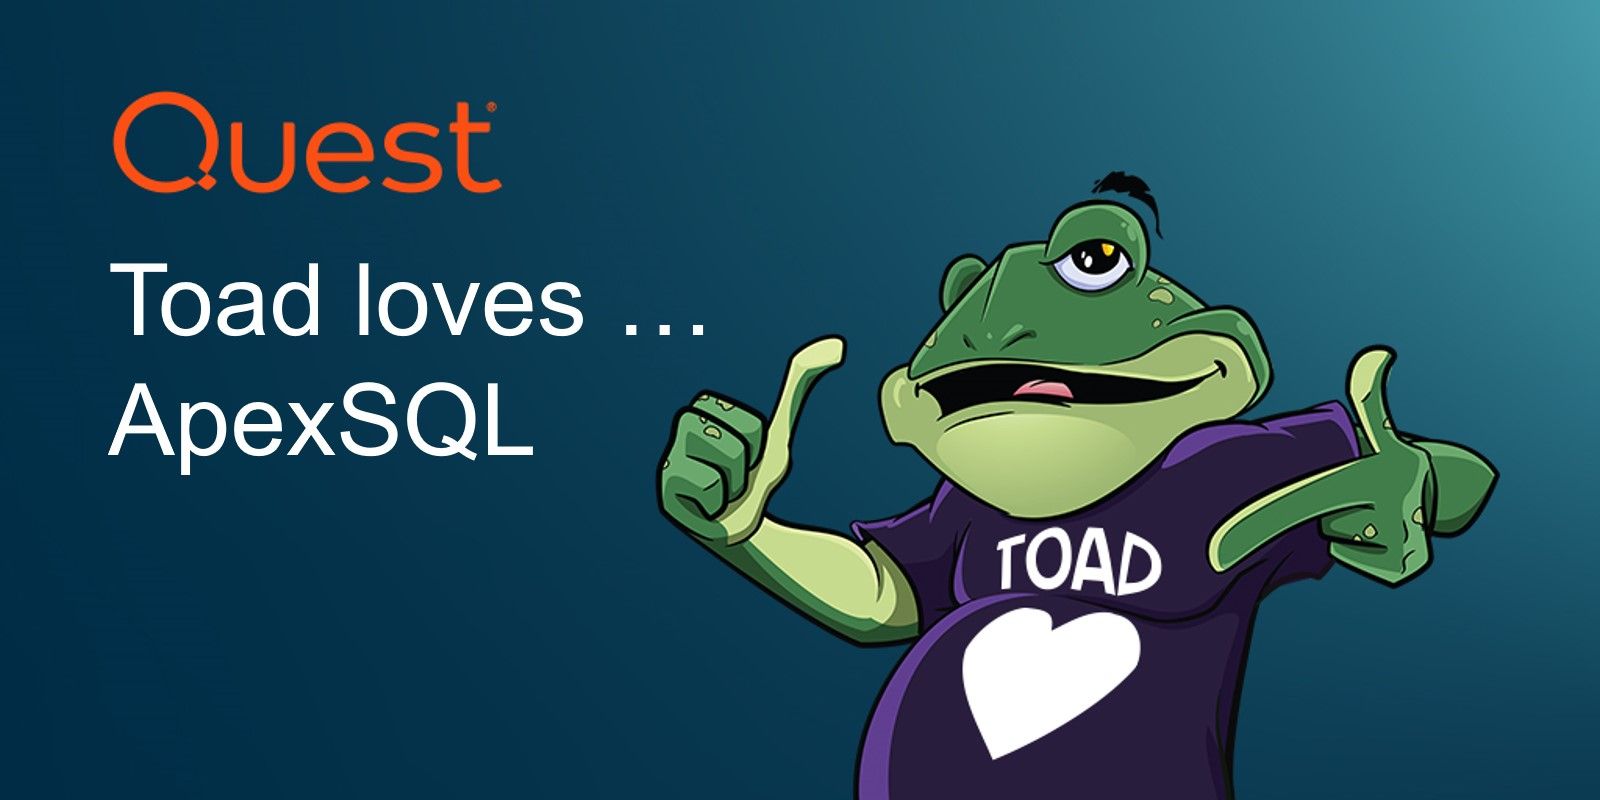 Toad love ApexSQL tools and how they integrate with SQL Server Management Studio.